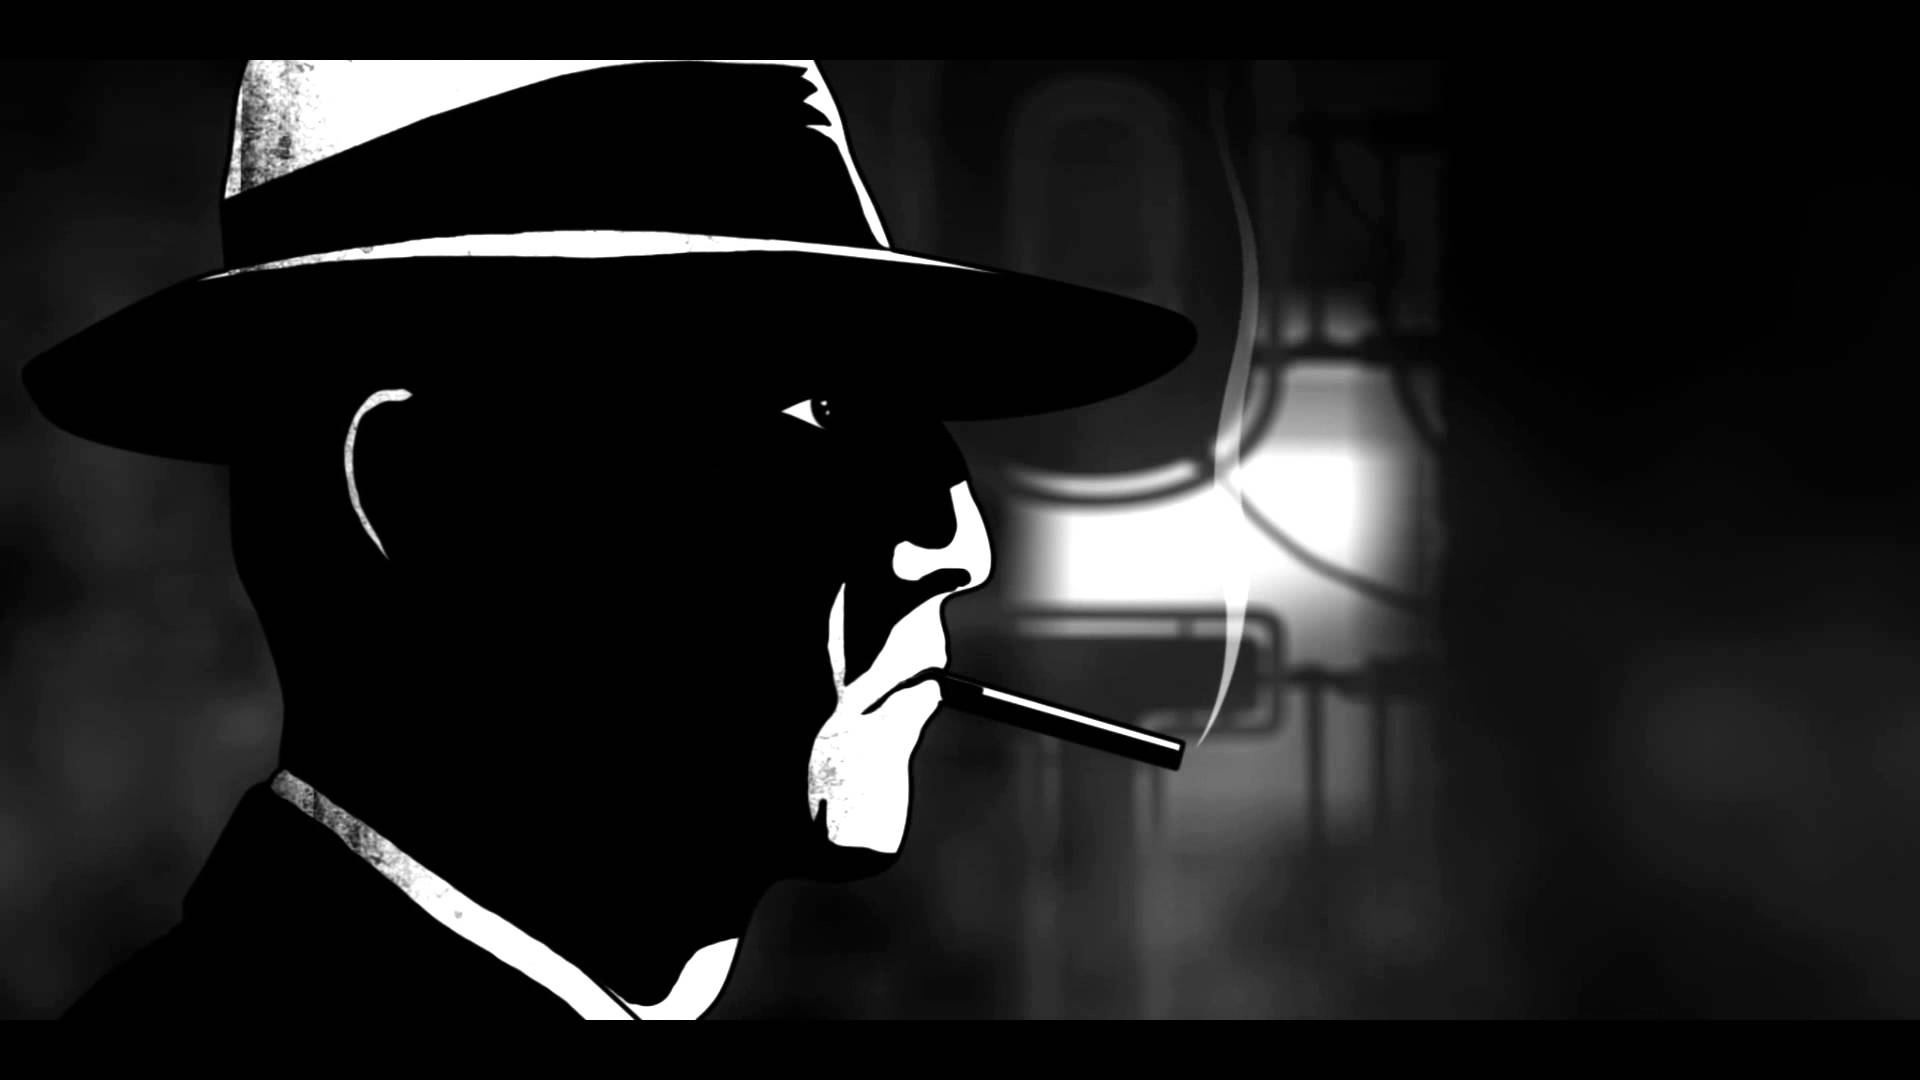 Animation excerpt from The Noir Project